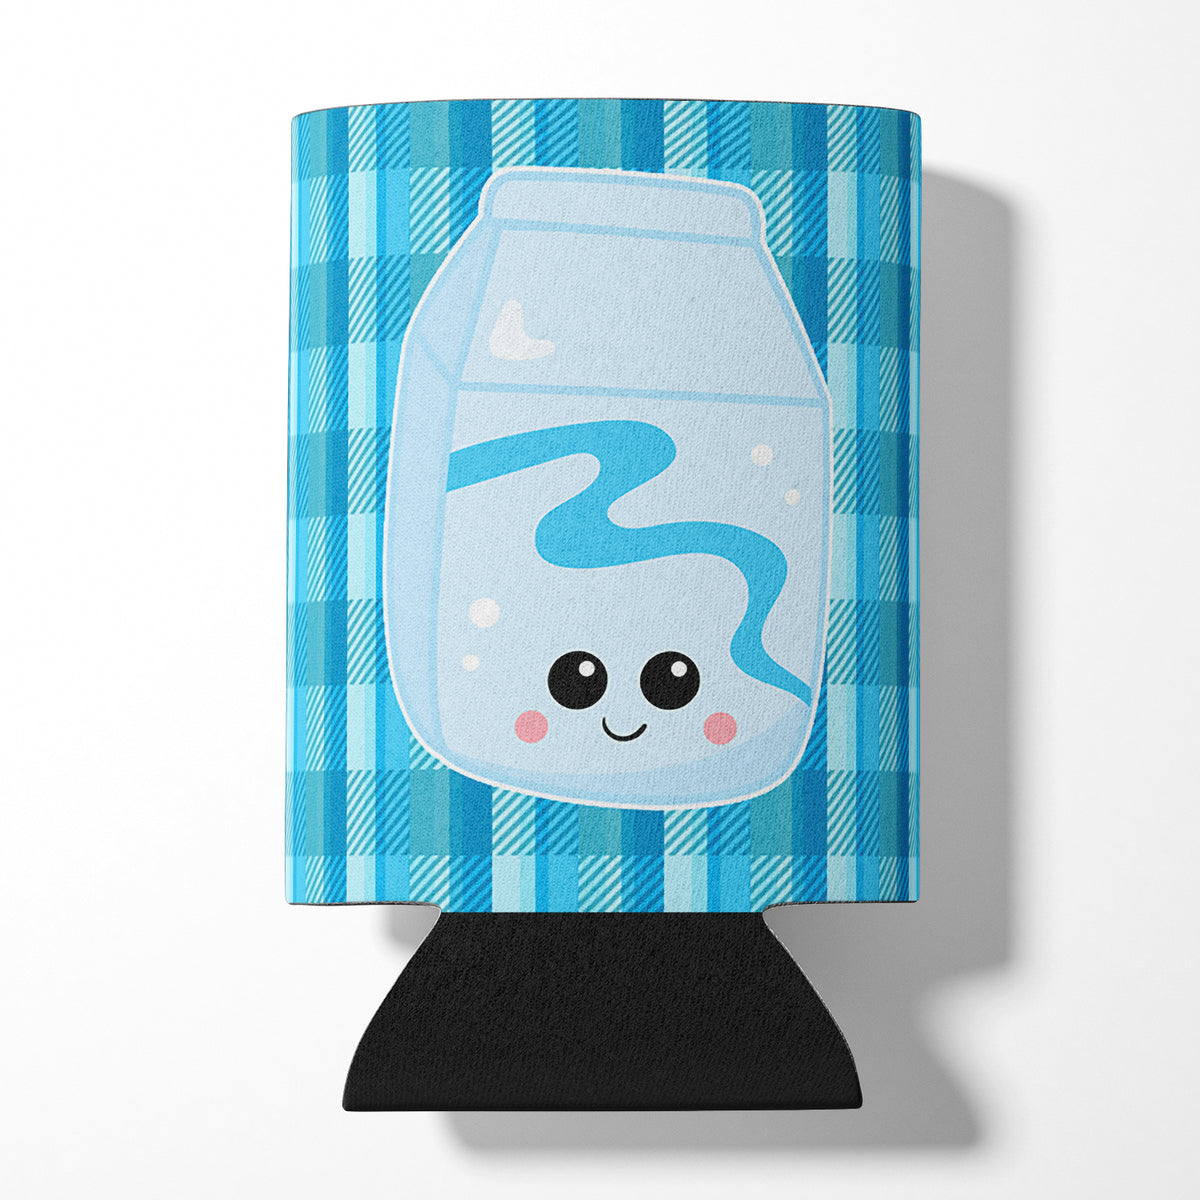 Blue Plaid and Milk Can or Bottle Hugger BB6846CC